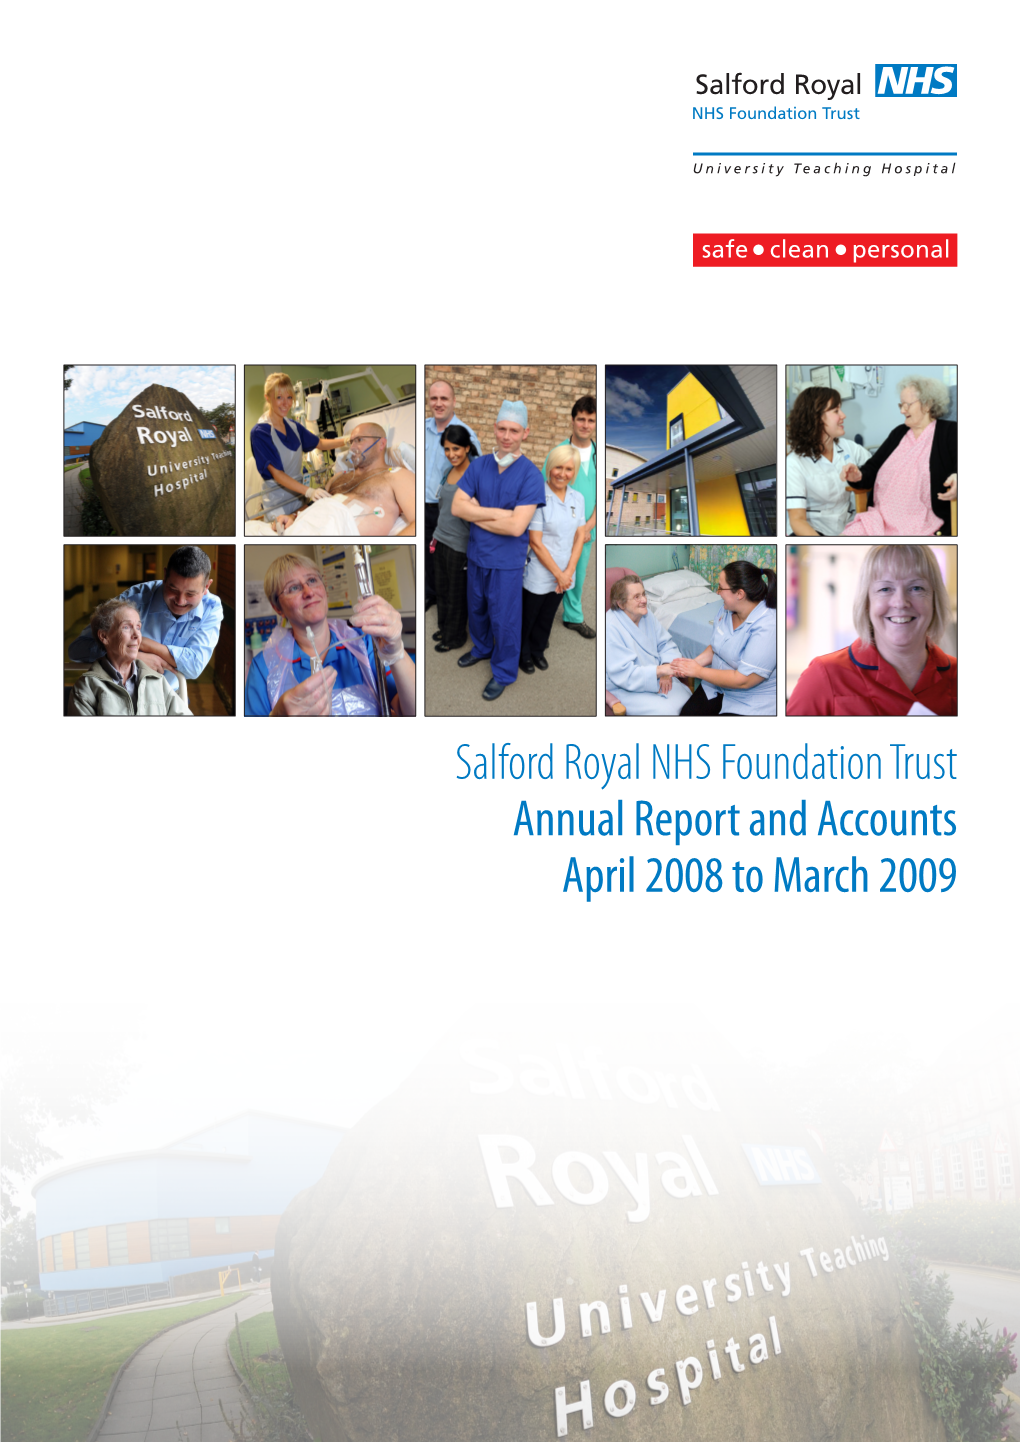 Salford Royal NHS Foundation Trust Annual Report and Accounts April